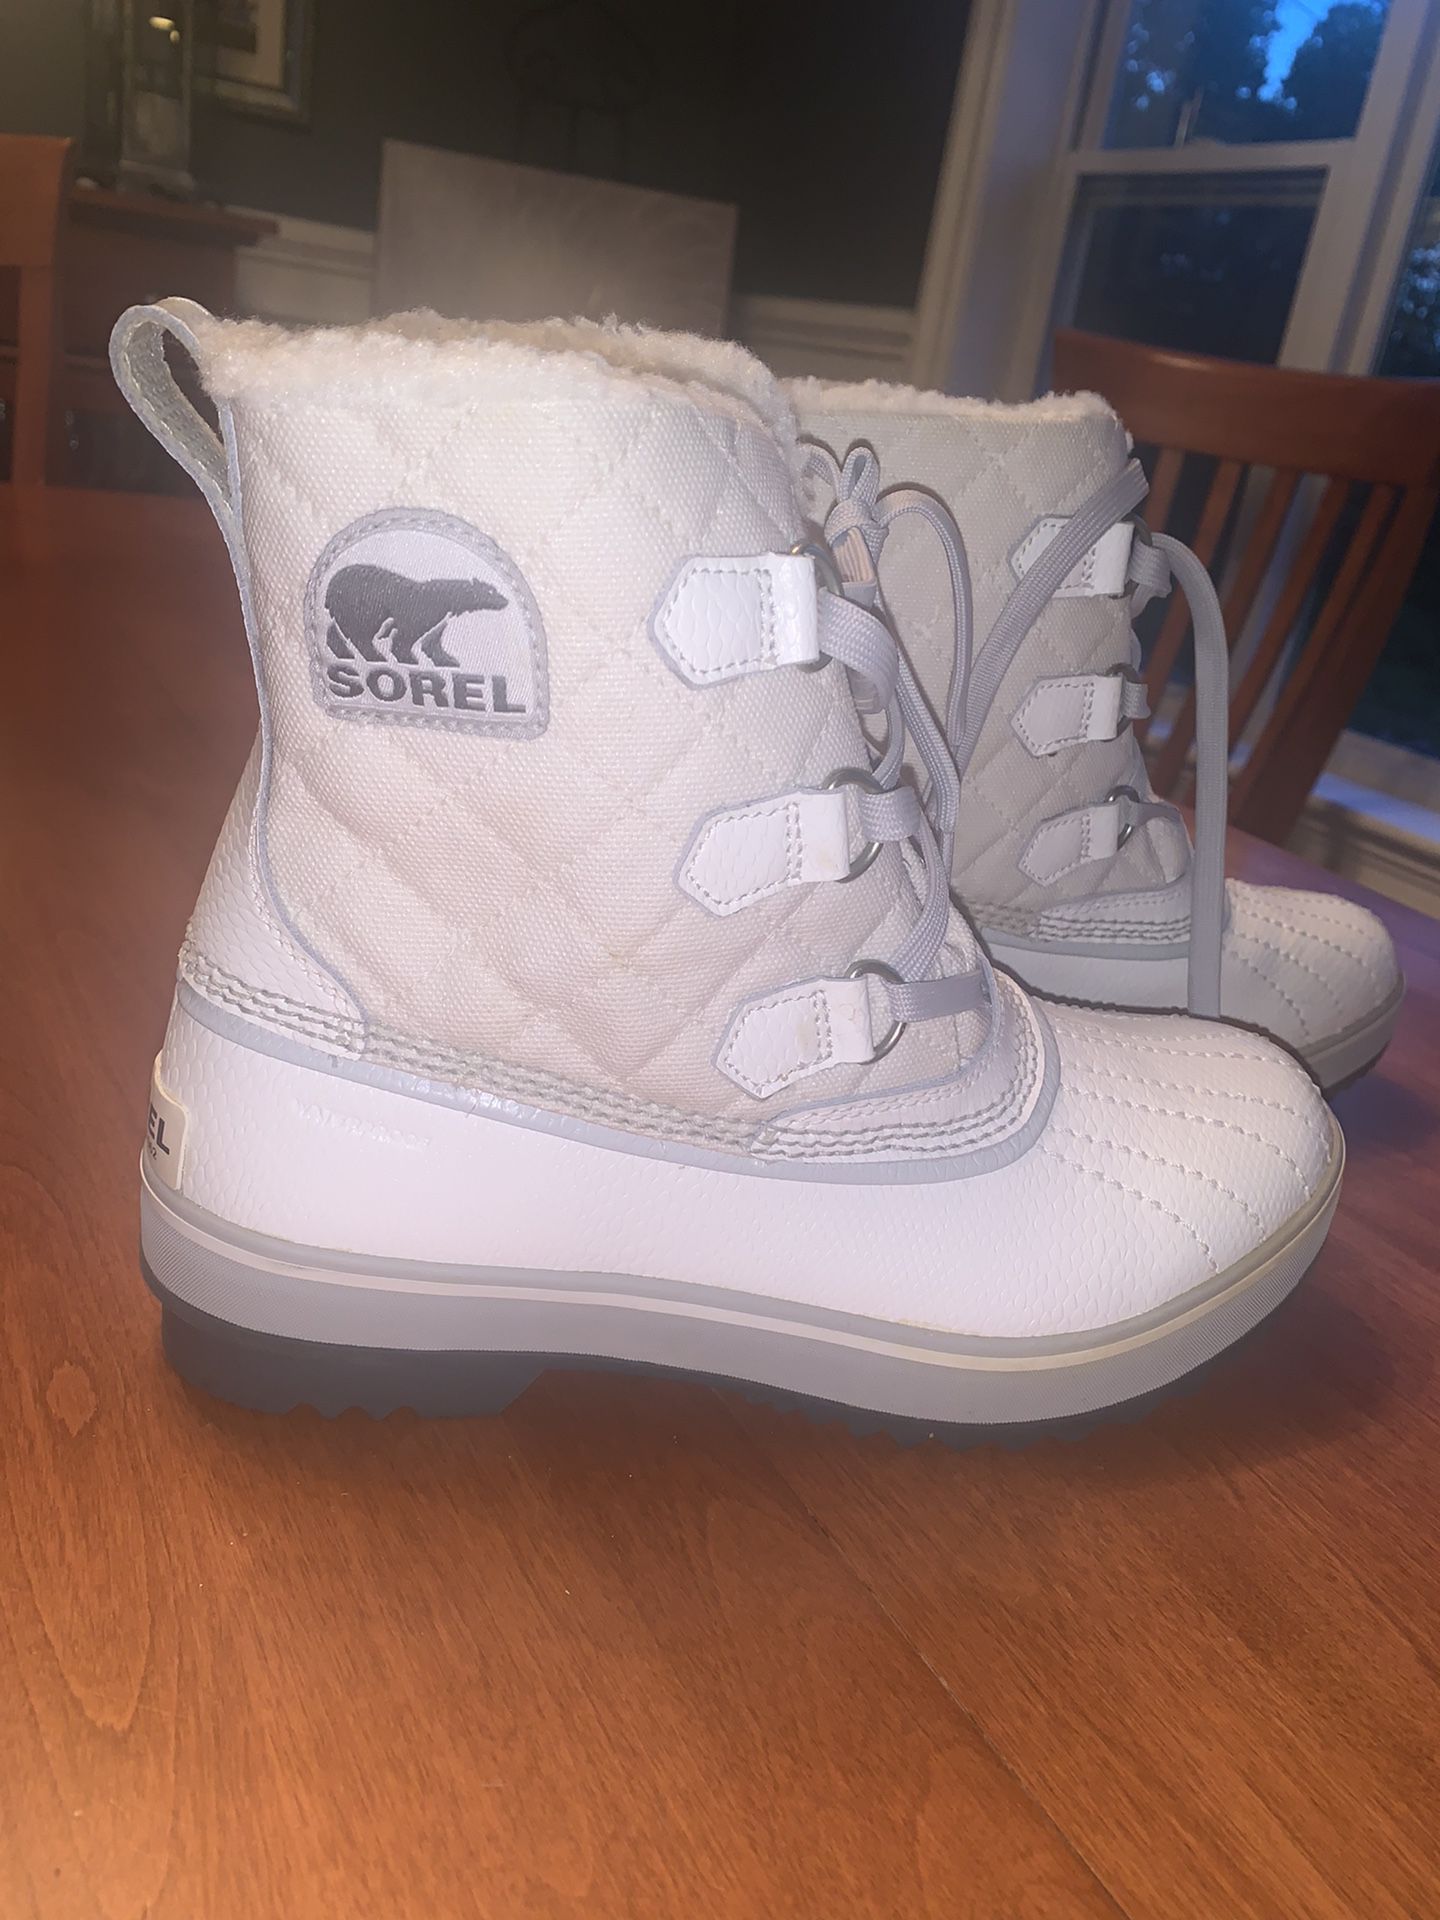 White/Light Gray Sorel Snow Boots Size 8. New with Box! 